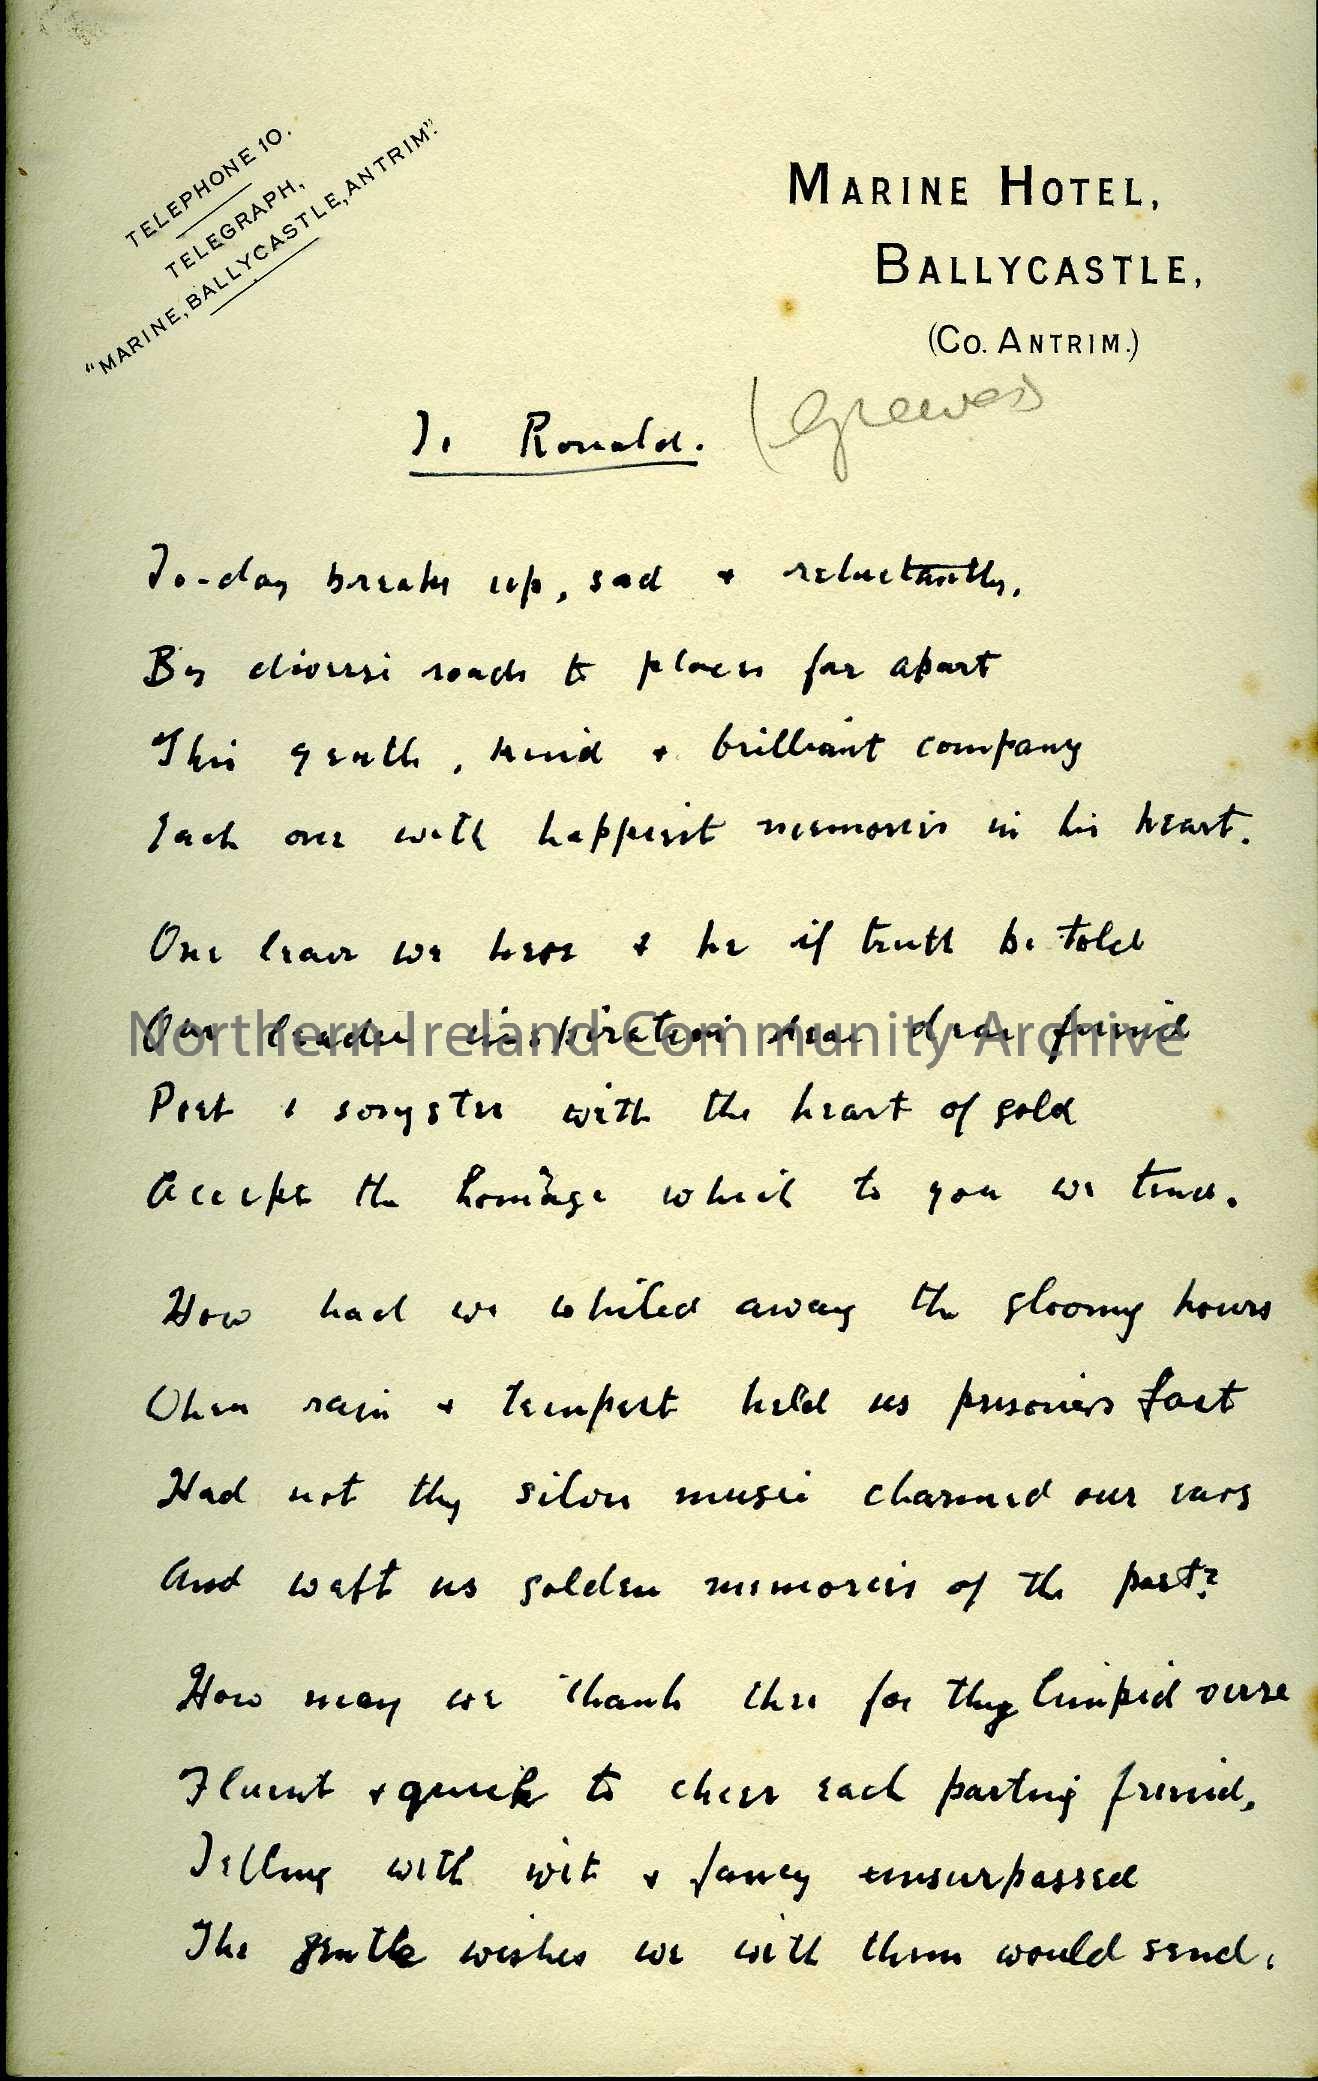 letter to J.Ronald on ‘Marine Hotel, Ballycastle’ headed note paper (3522)